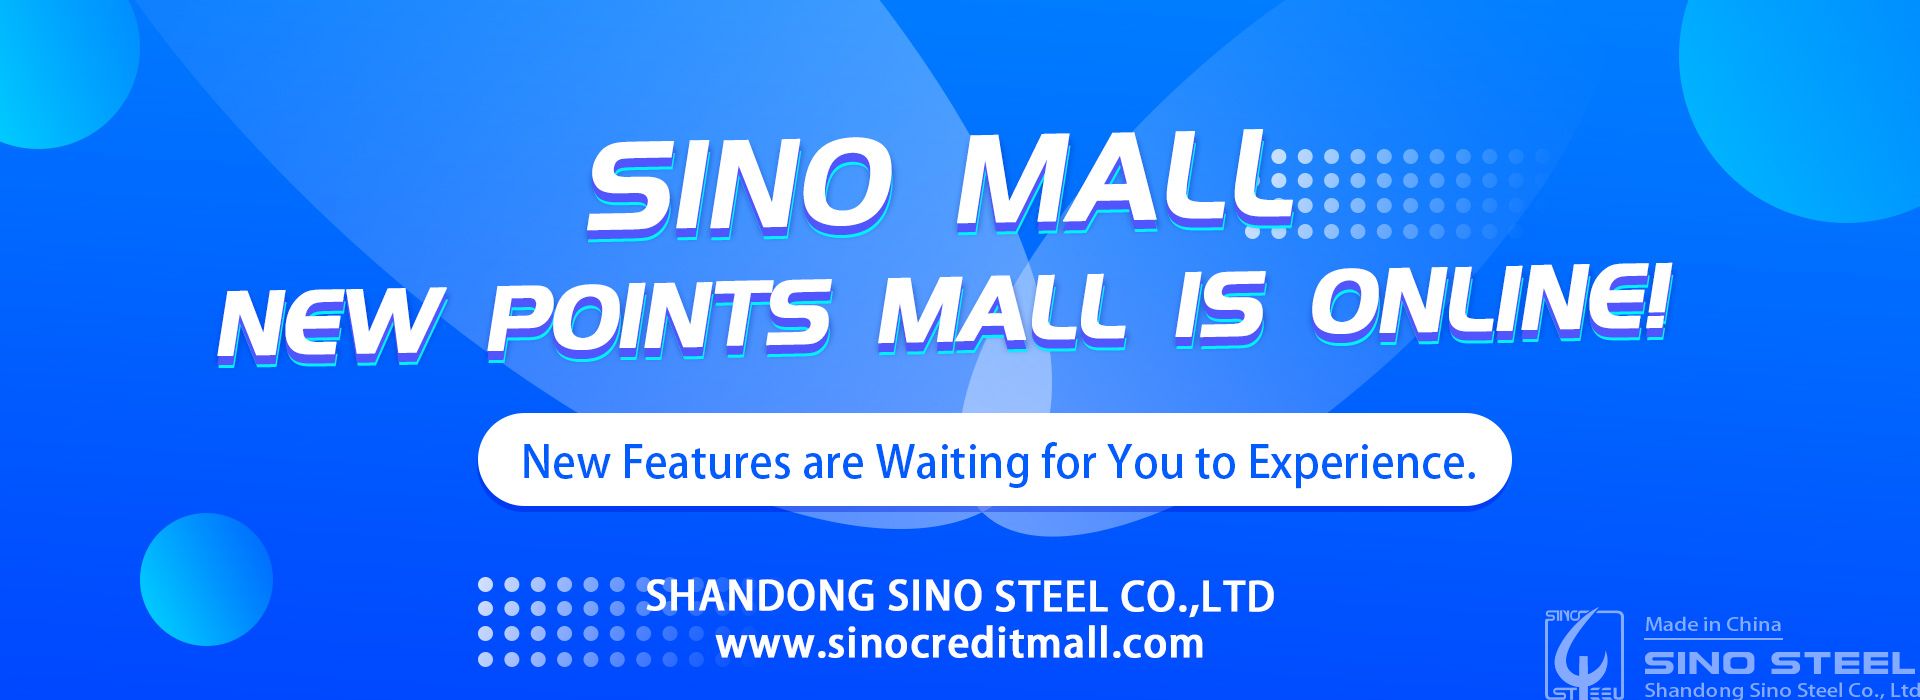 The Sino Credit Mall revision has been launched!